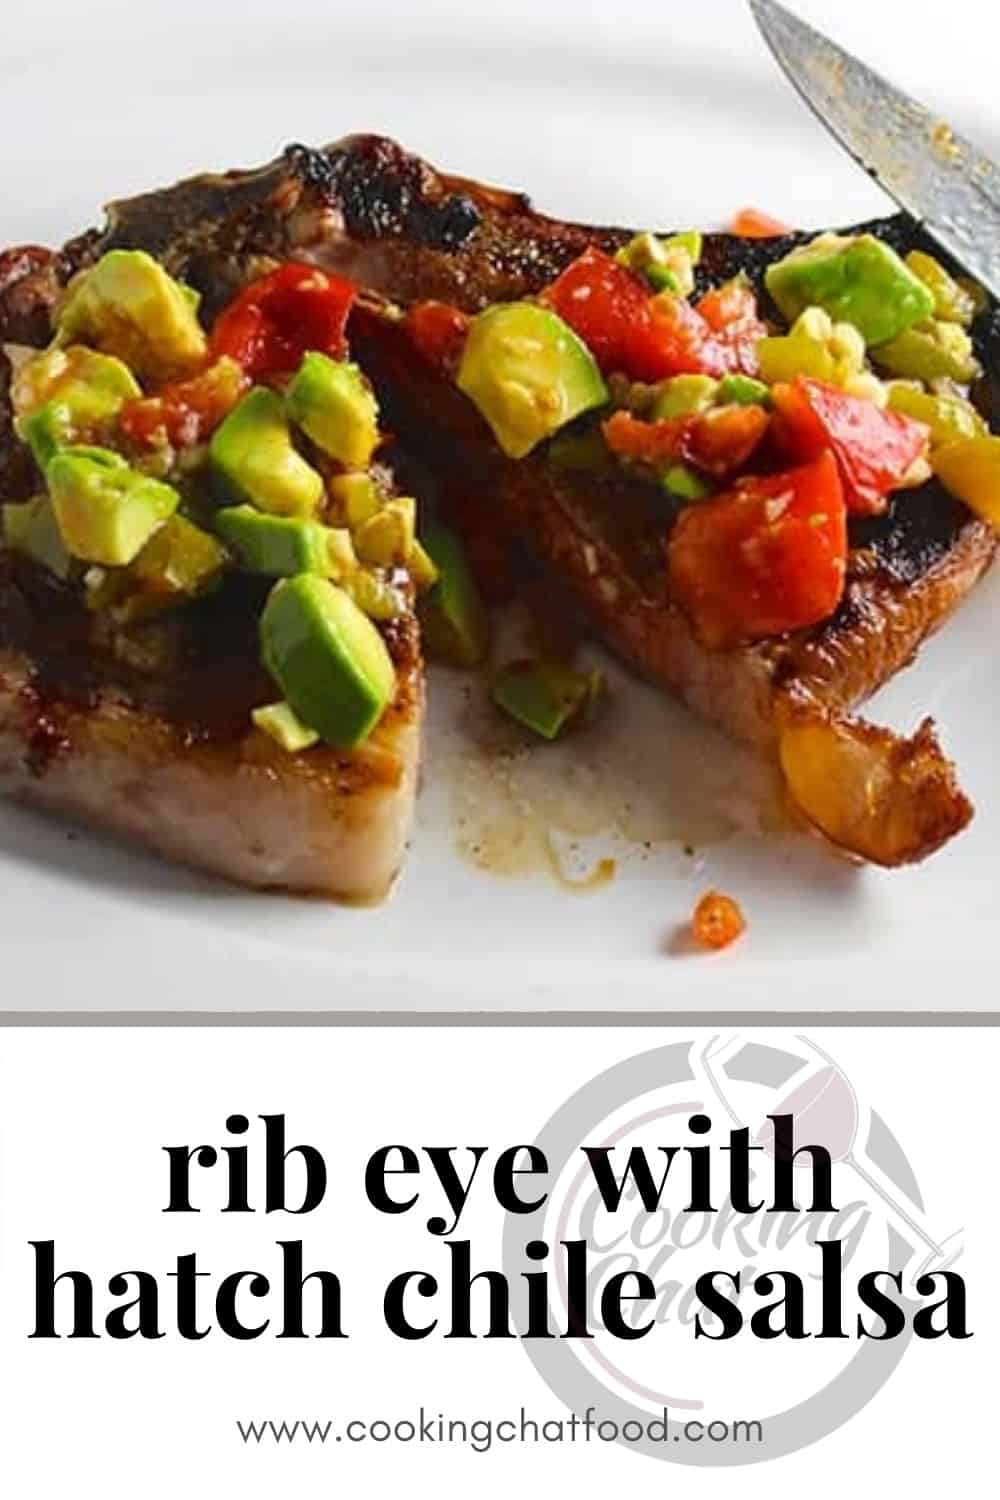 grilled ribeye topped with hatch chile salsa, with text describing the recipe.